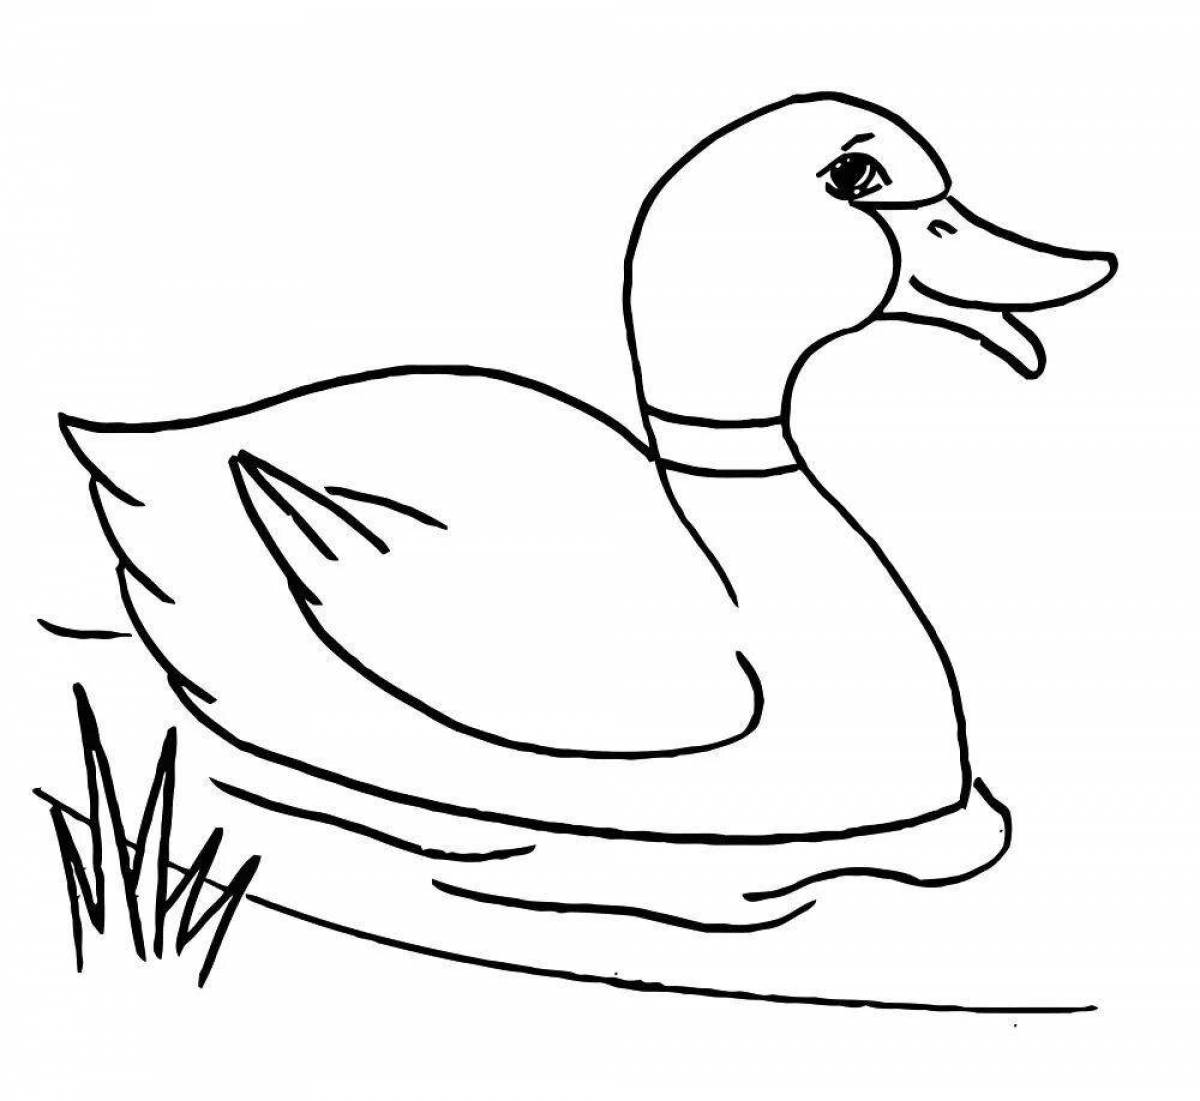 Colorful duck coloring page for kids